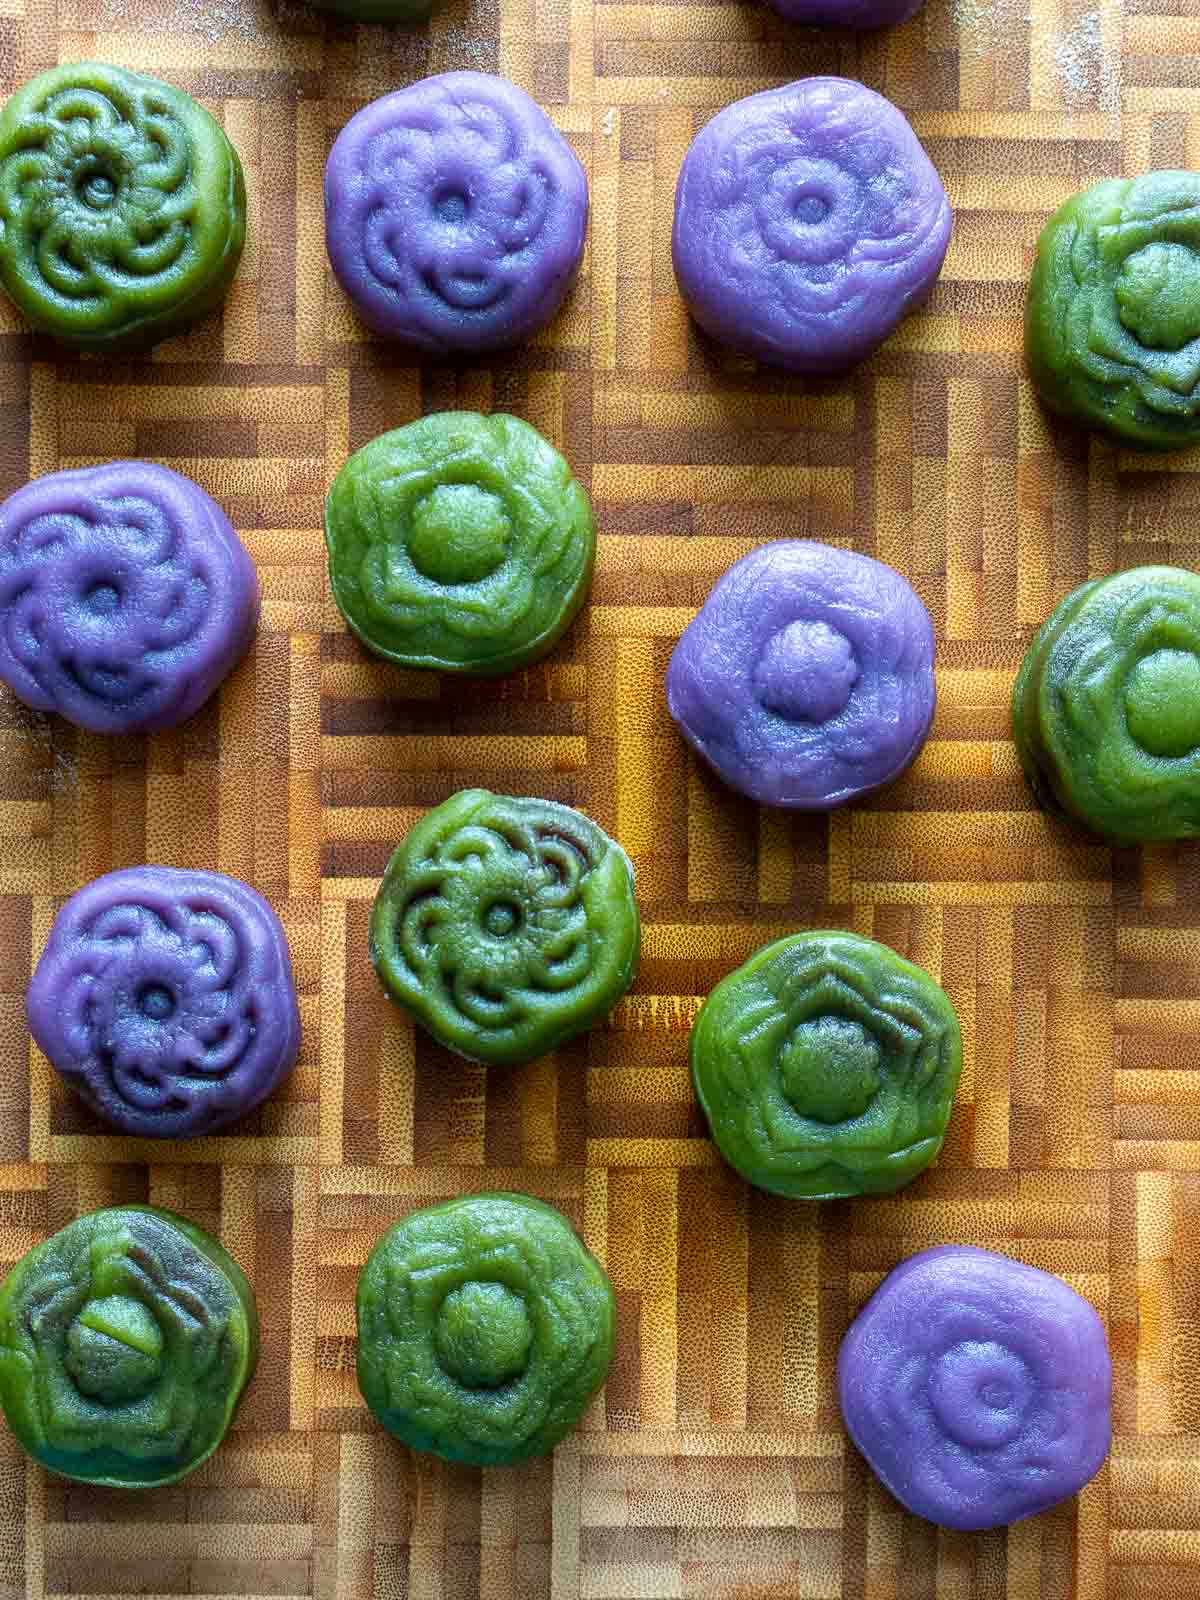 Green matcha and purple Ube crystal ice skinned mooncakes on a wooden cutting board.